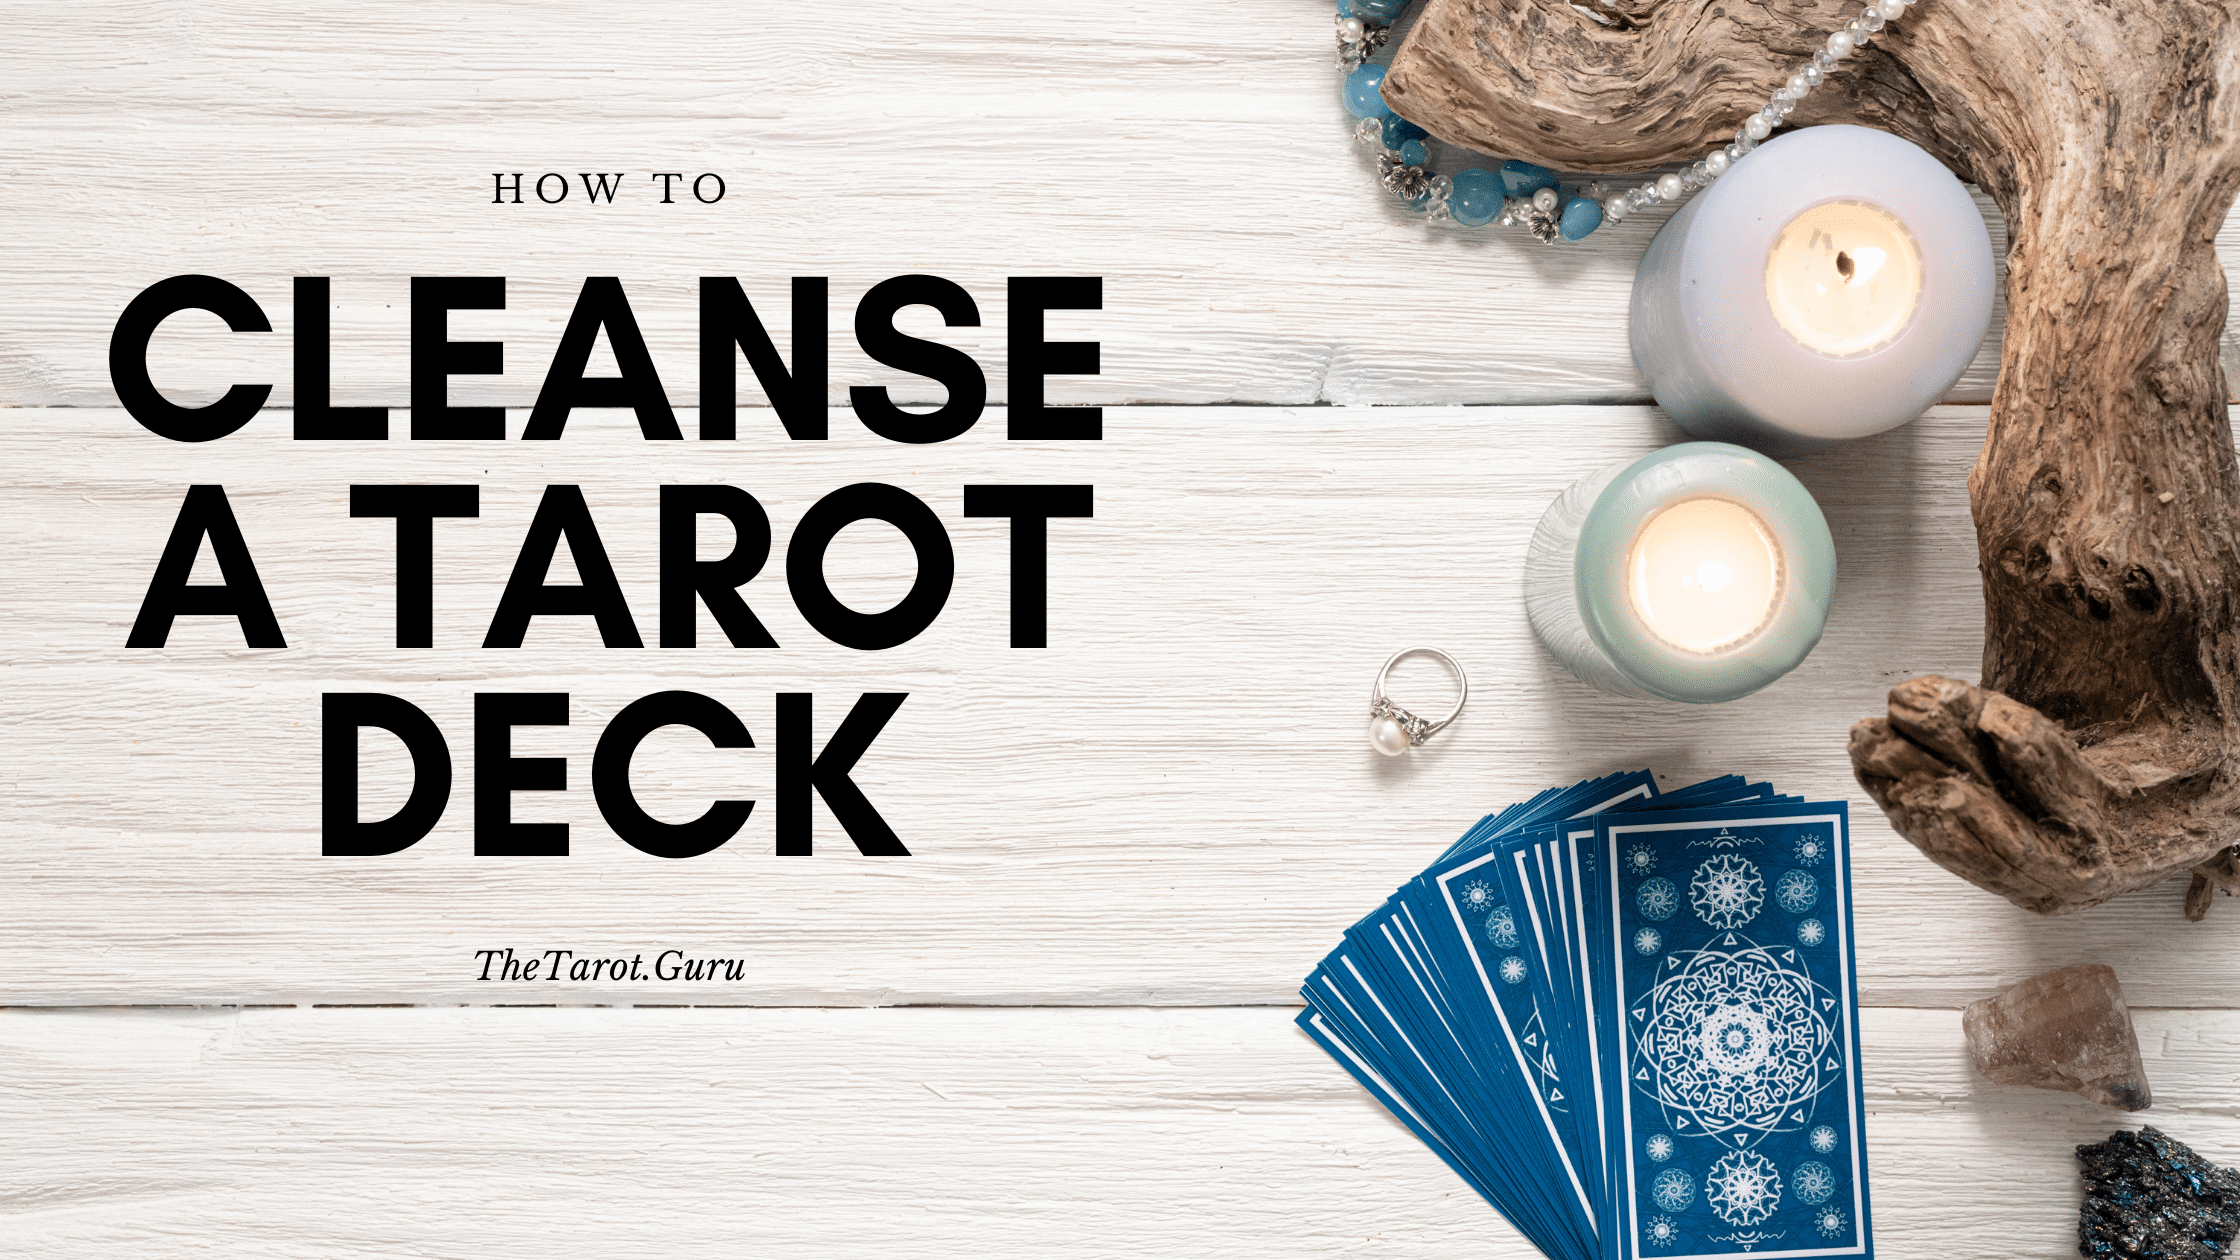 How to Cleanse a Tarot Deck